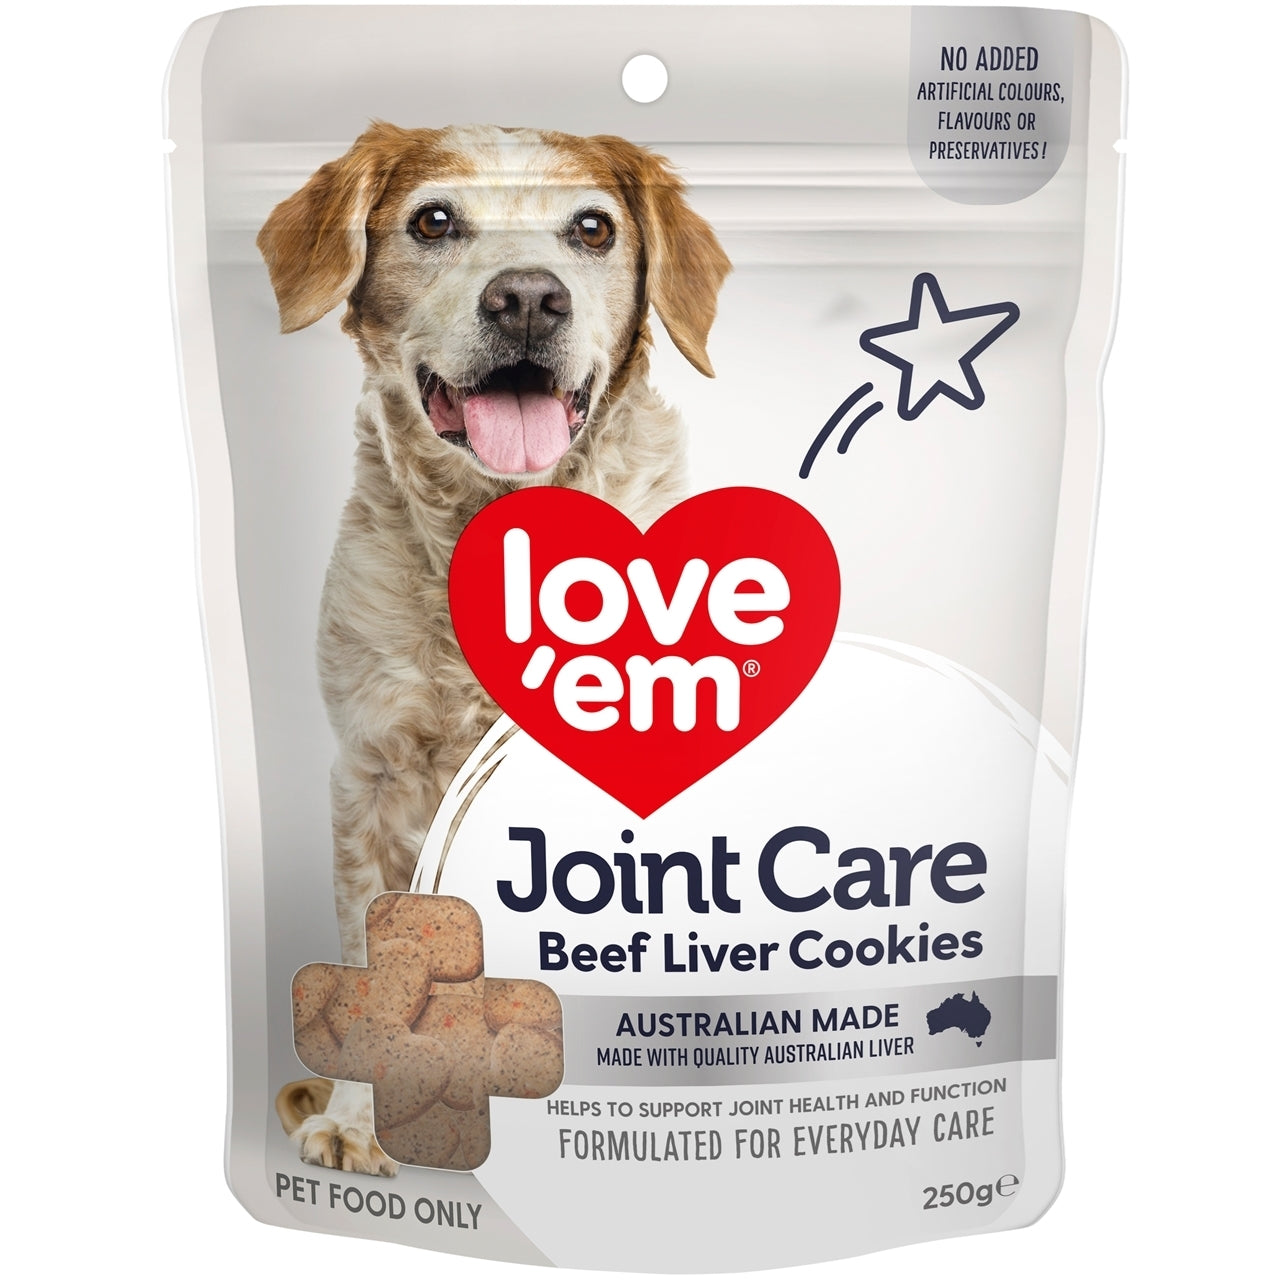 Love'em Treats Joint Care Beef Liver Cookies 250g x 5